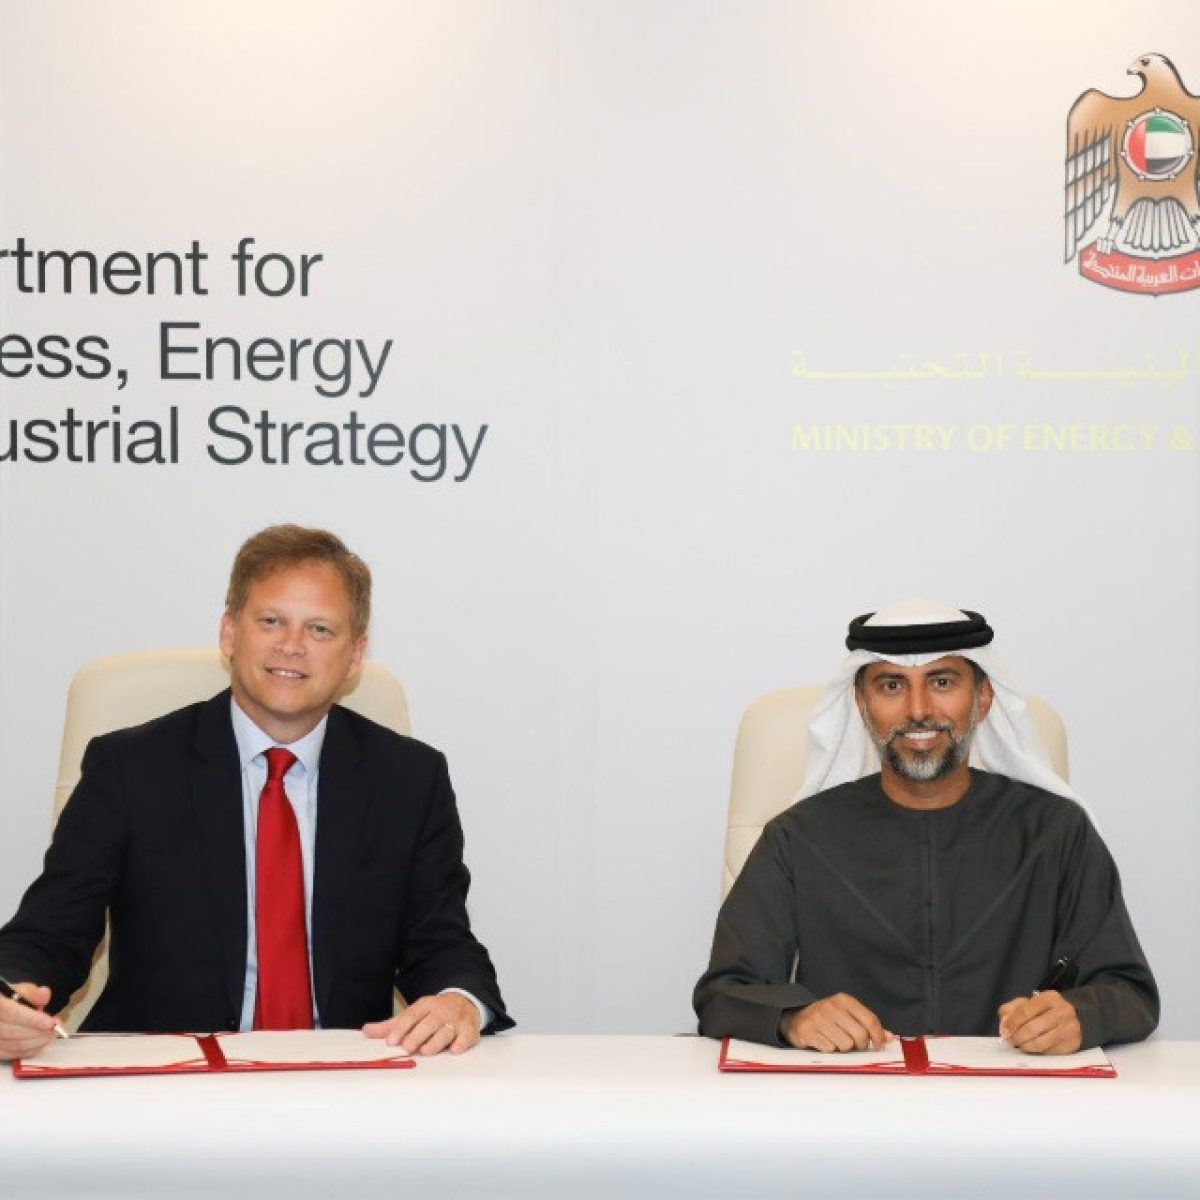 UK enters international partnership with UAE and Colombia to boost clean energy sector